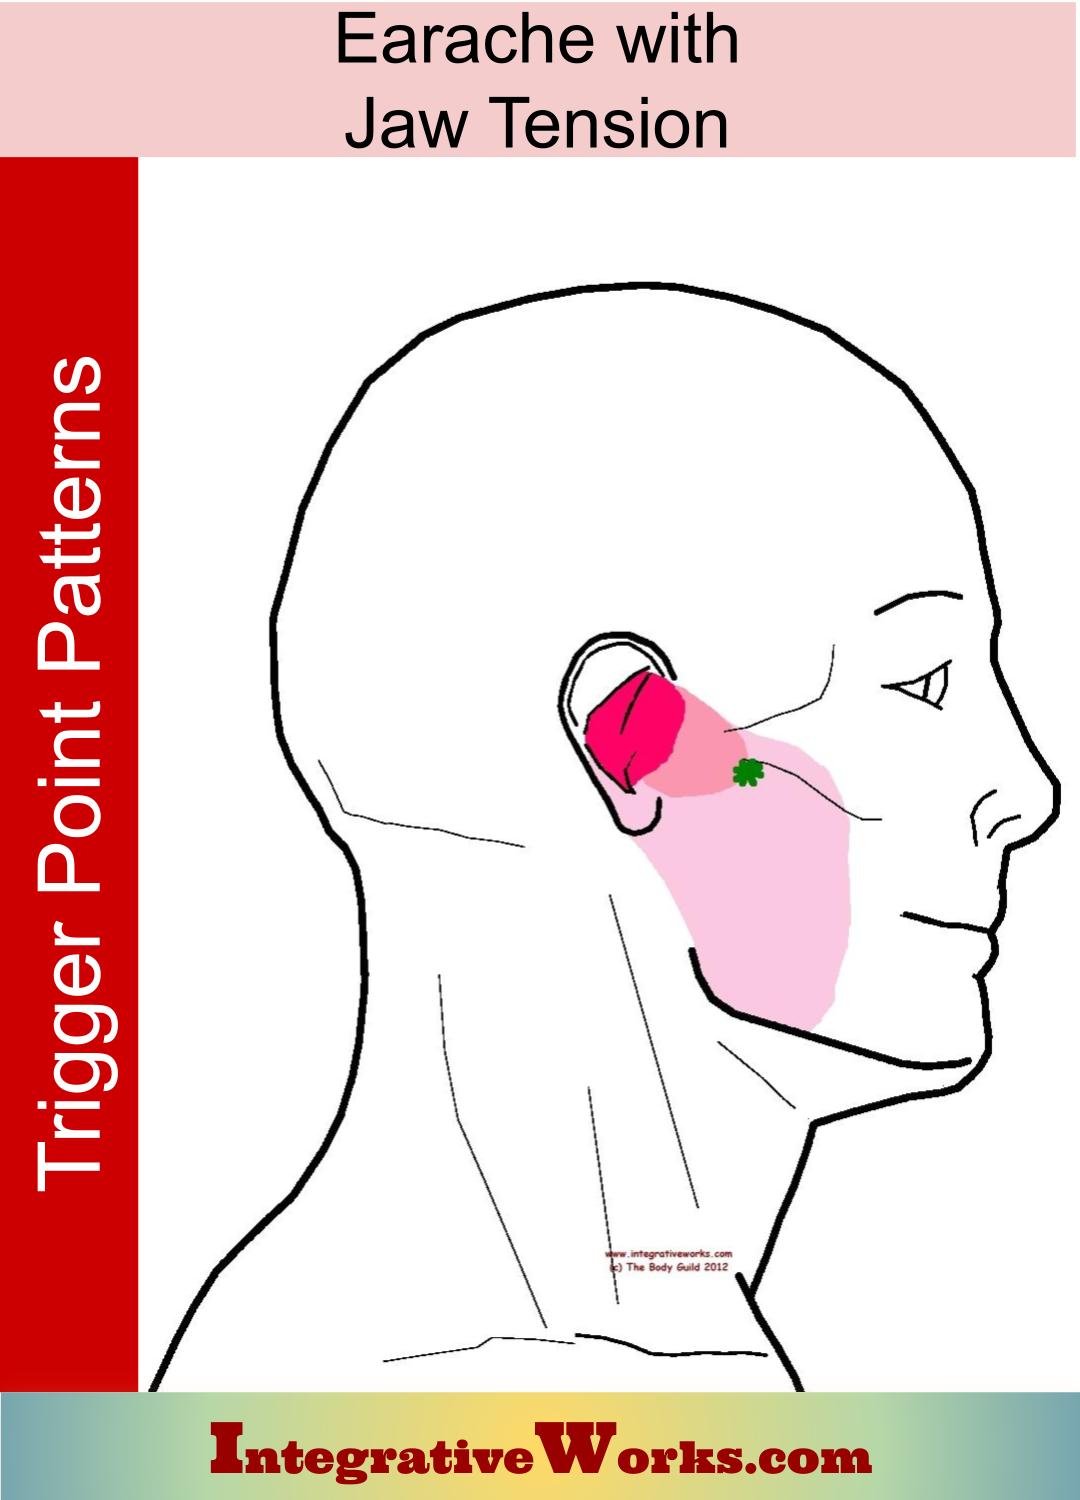 Earache with Jaw tension